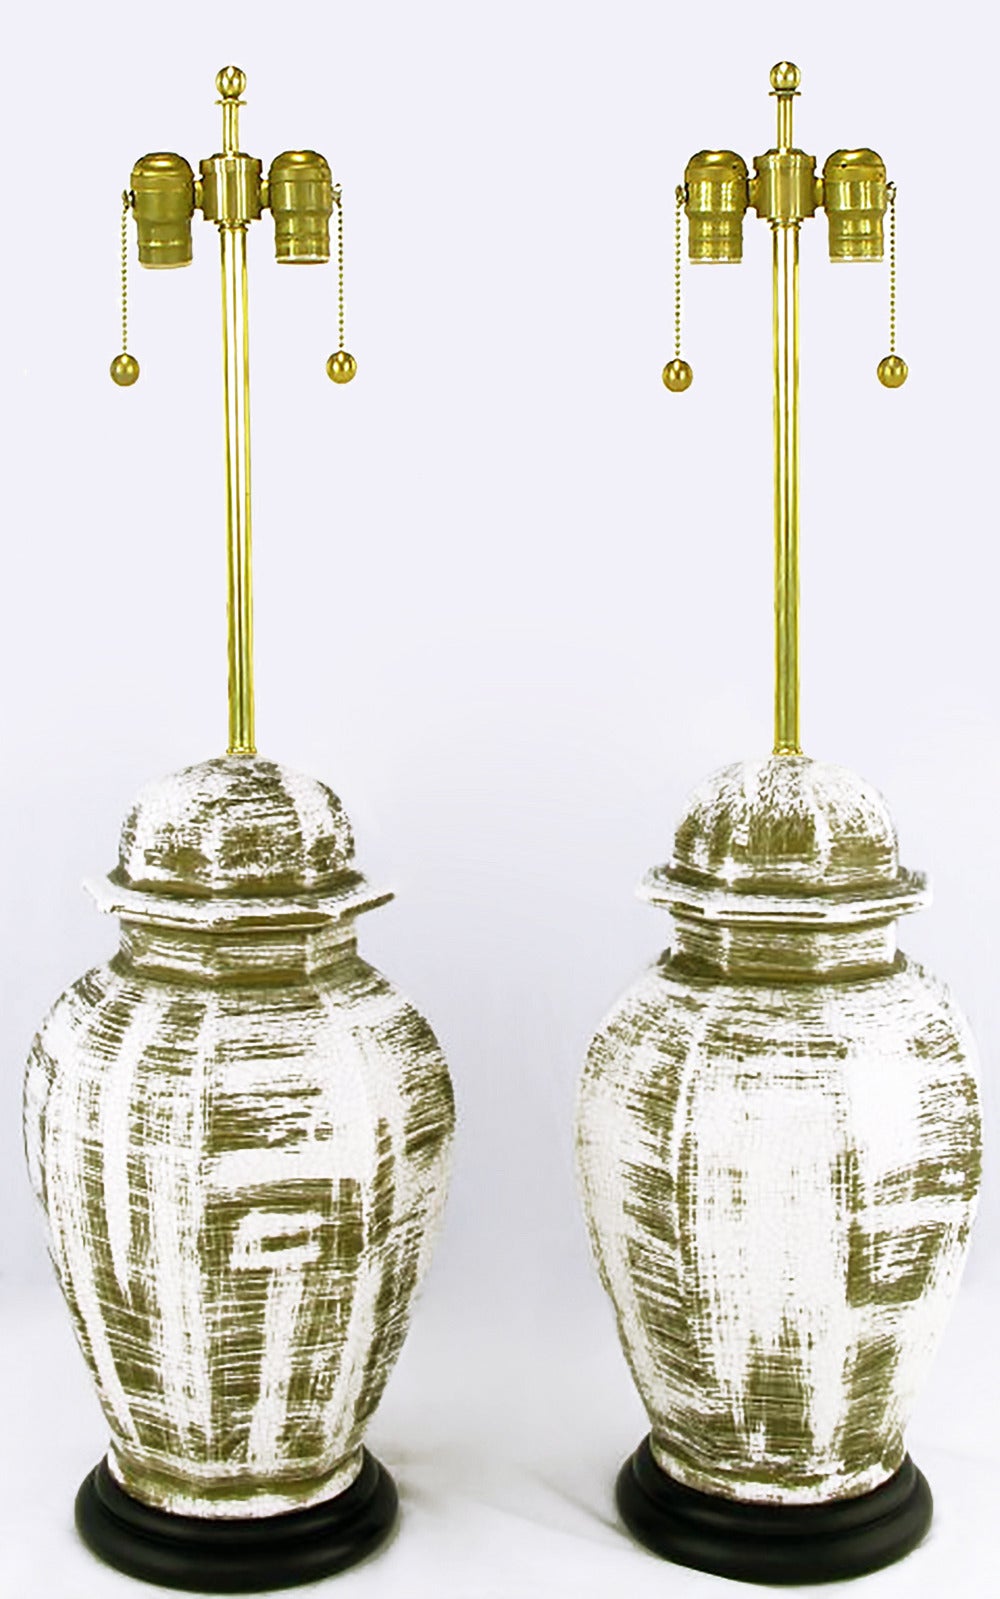 Elegant pair of ginger jar form ceramic table lamps with an aged deep gilt glazing over white crackled porcelain and black lacquered base. New brass stems and double socket clusters. Sold sans shades.